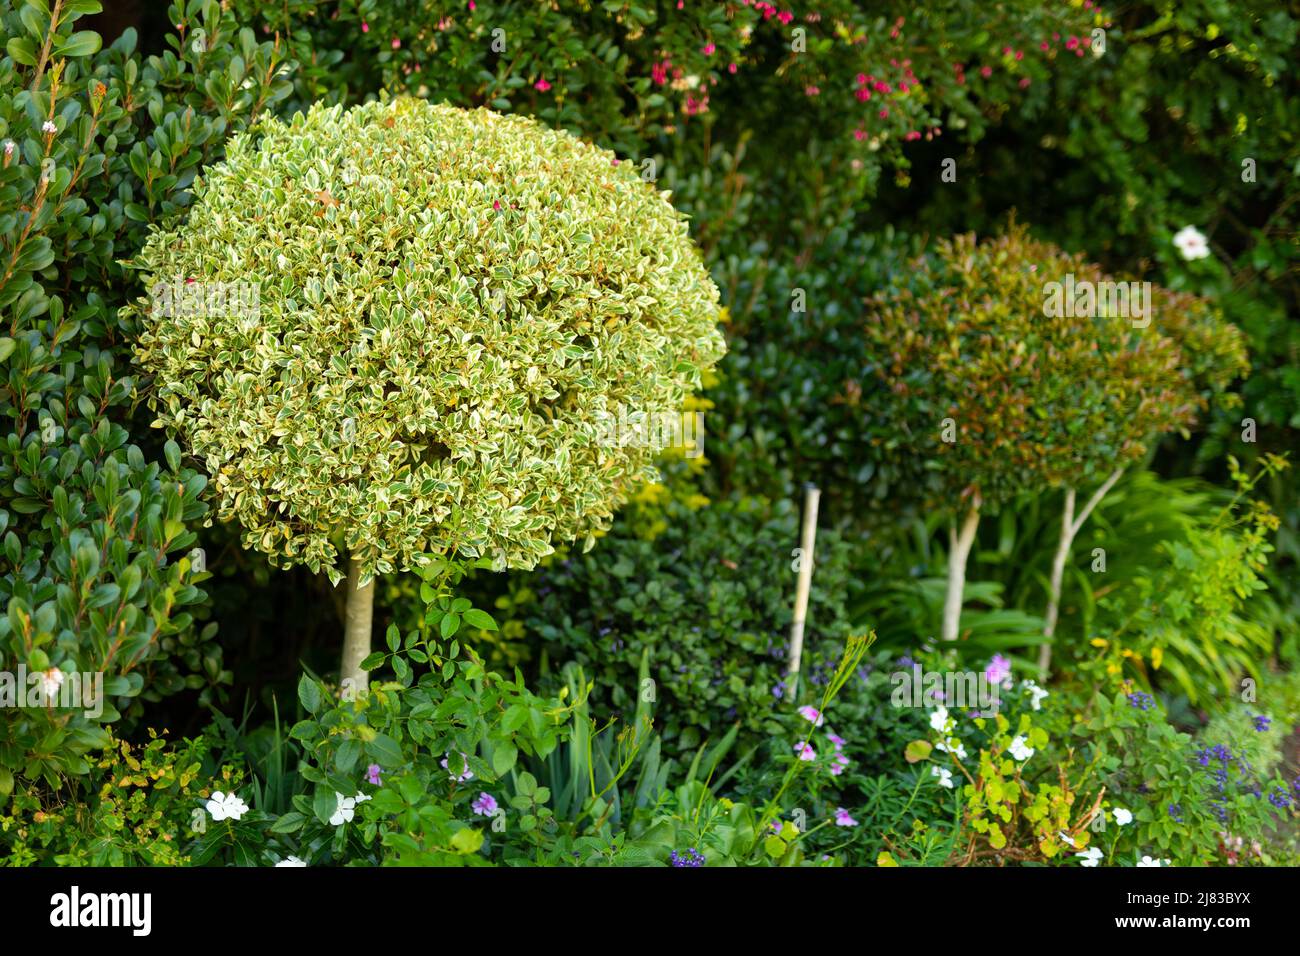 Full frame shot of various flowers with plants and trees growing in park Stock Photo